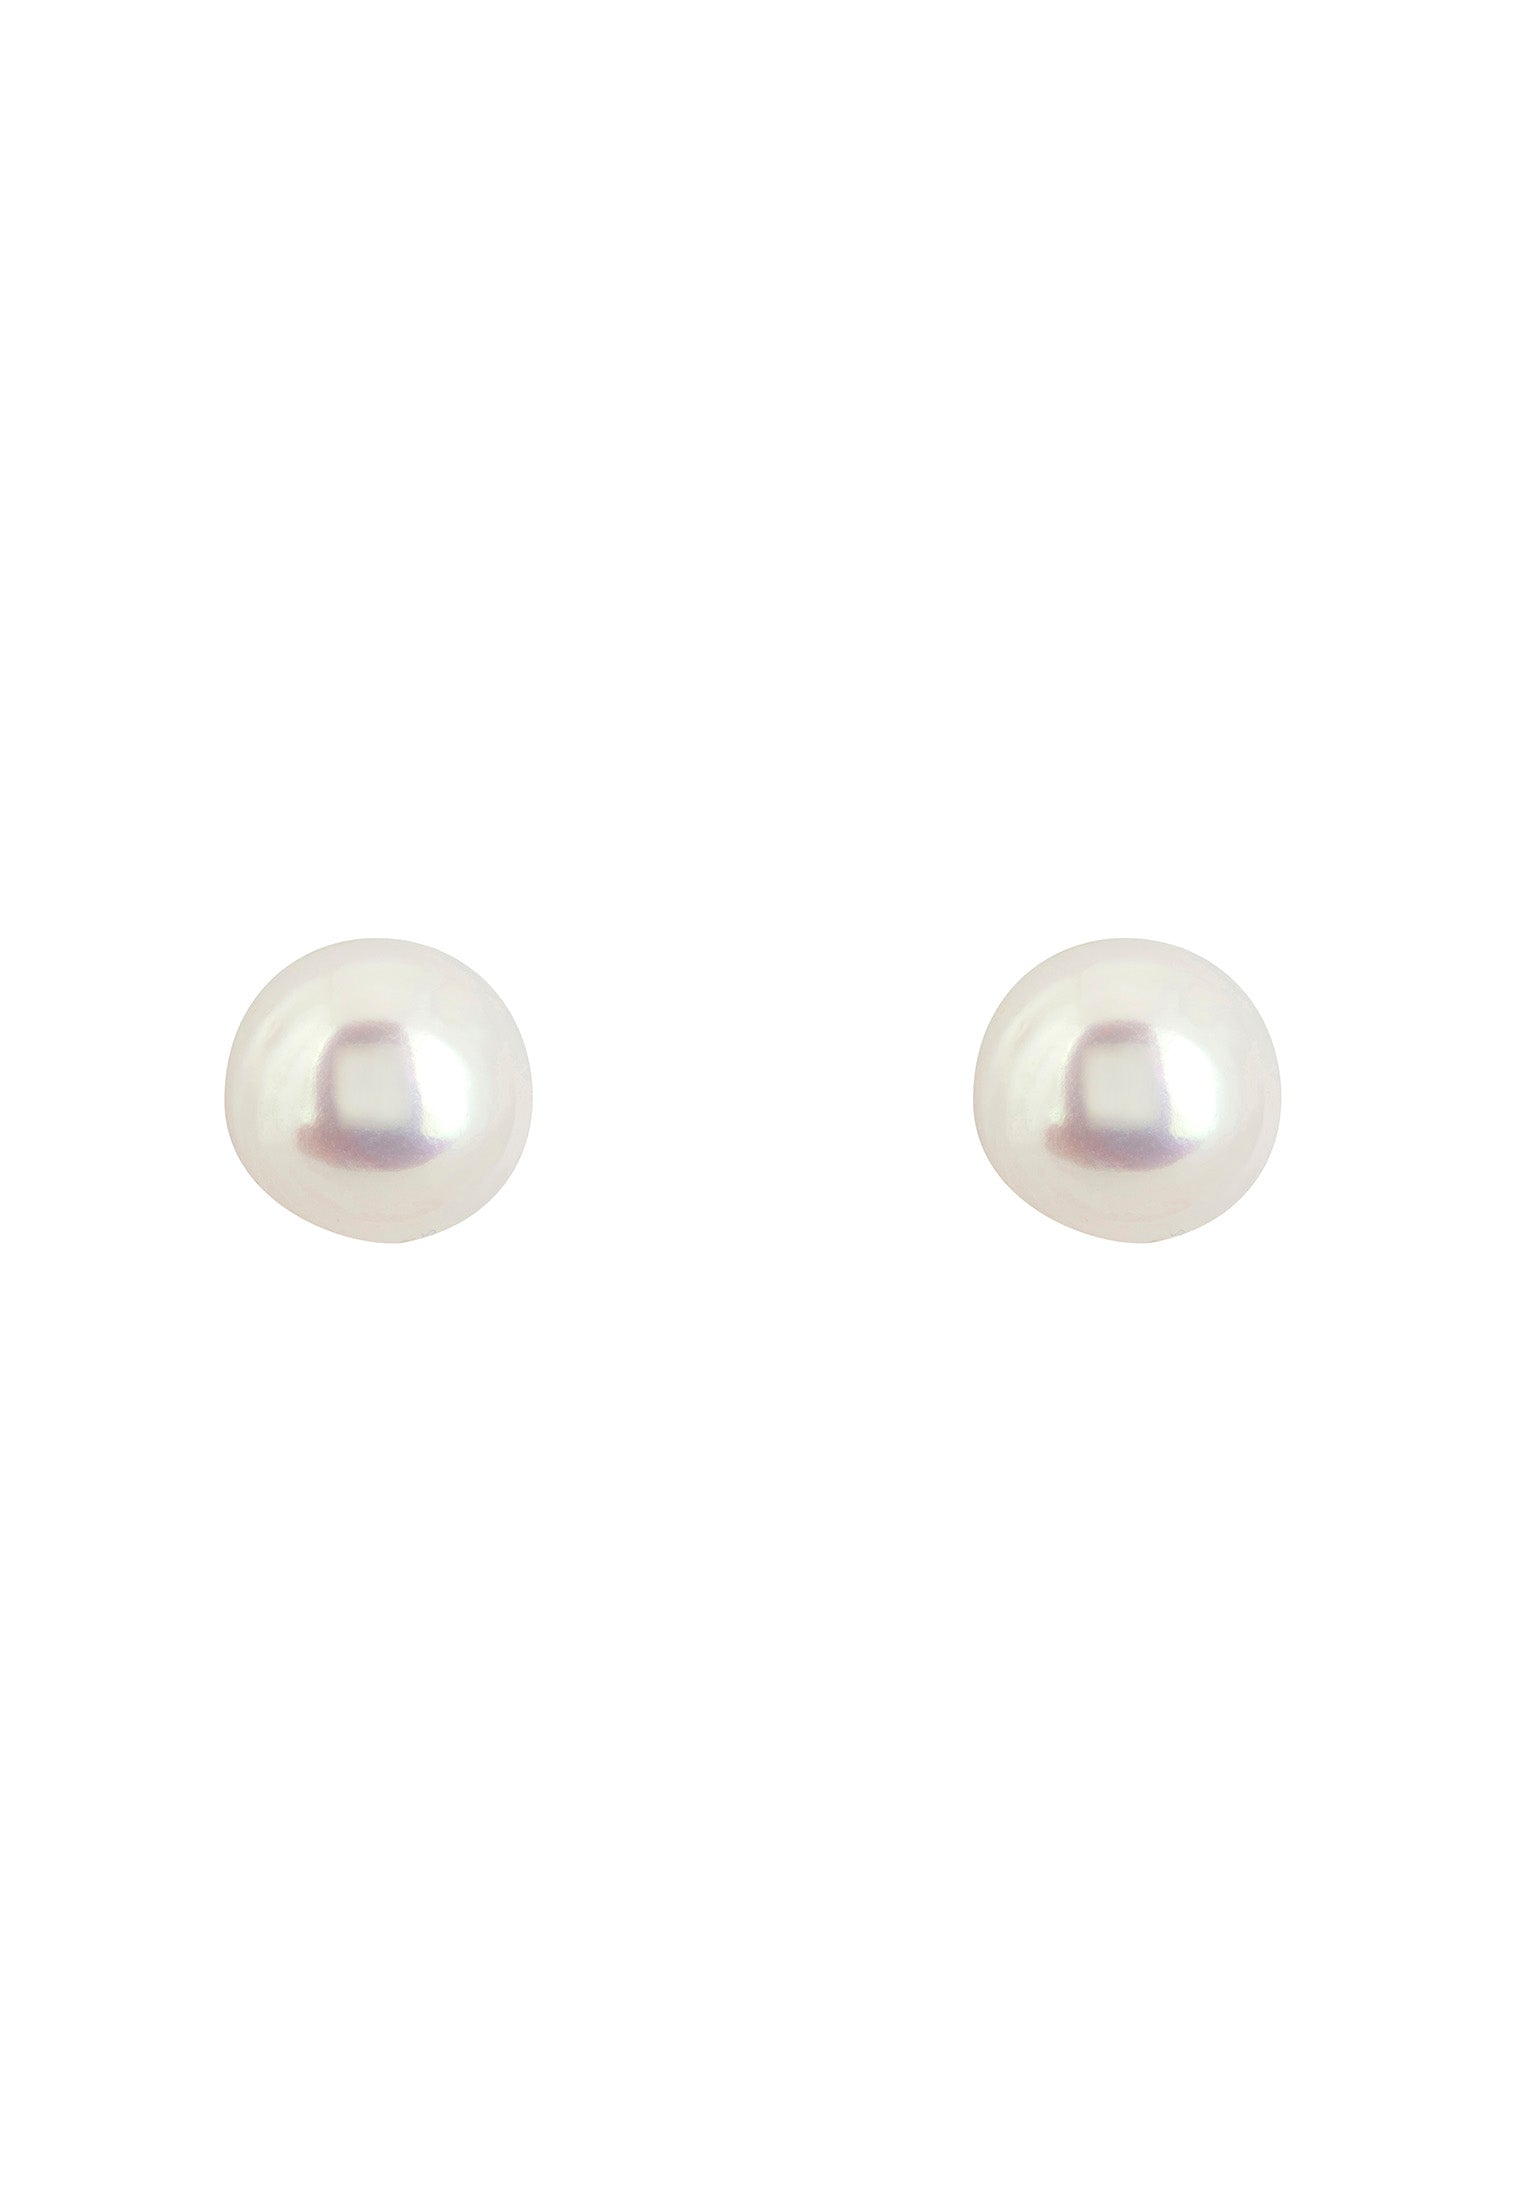 Solid 14K Gold 8mm Classic Natural Pearl Stud Earrings